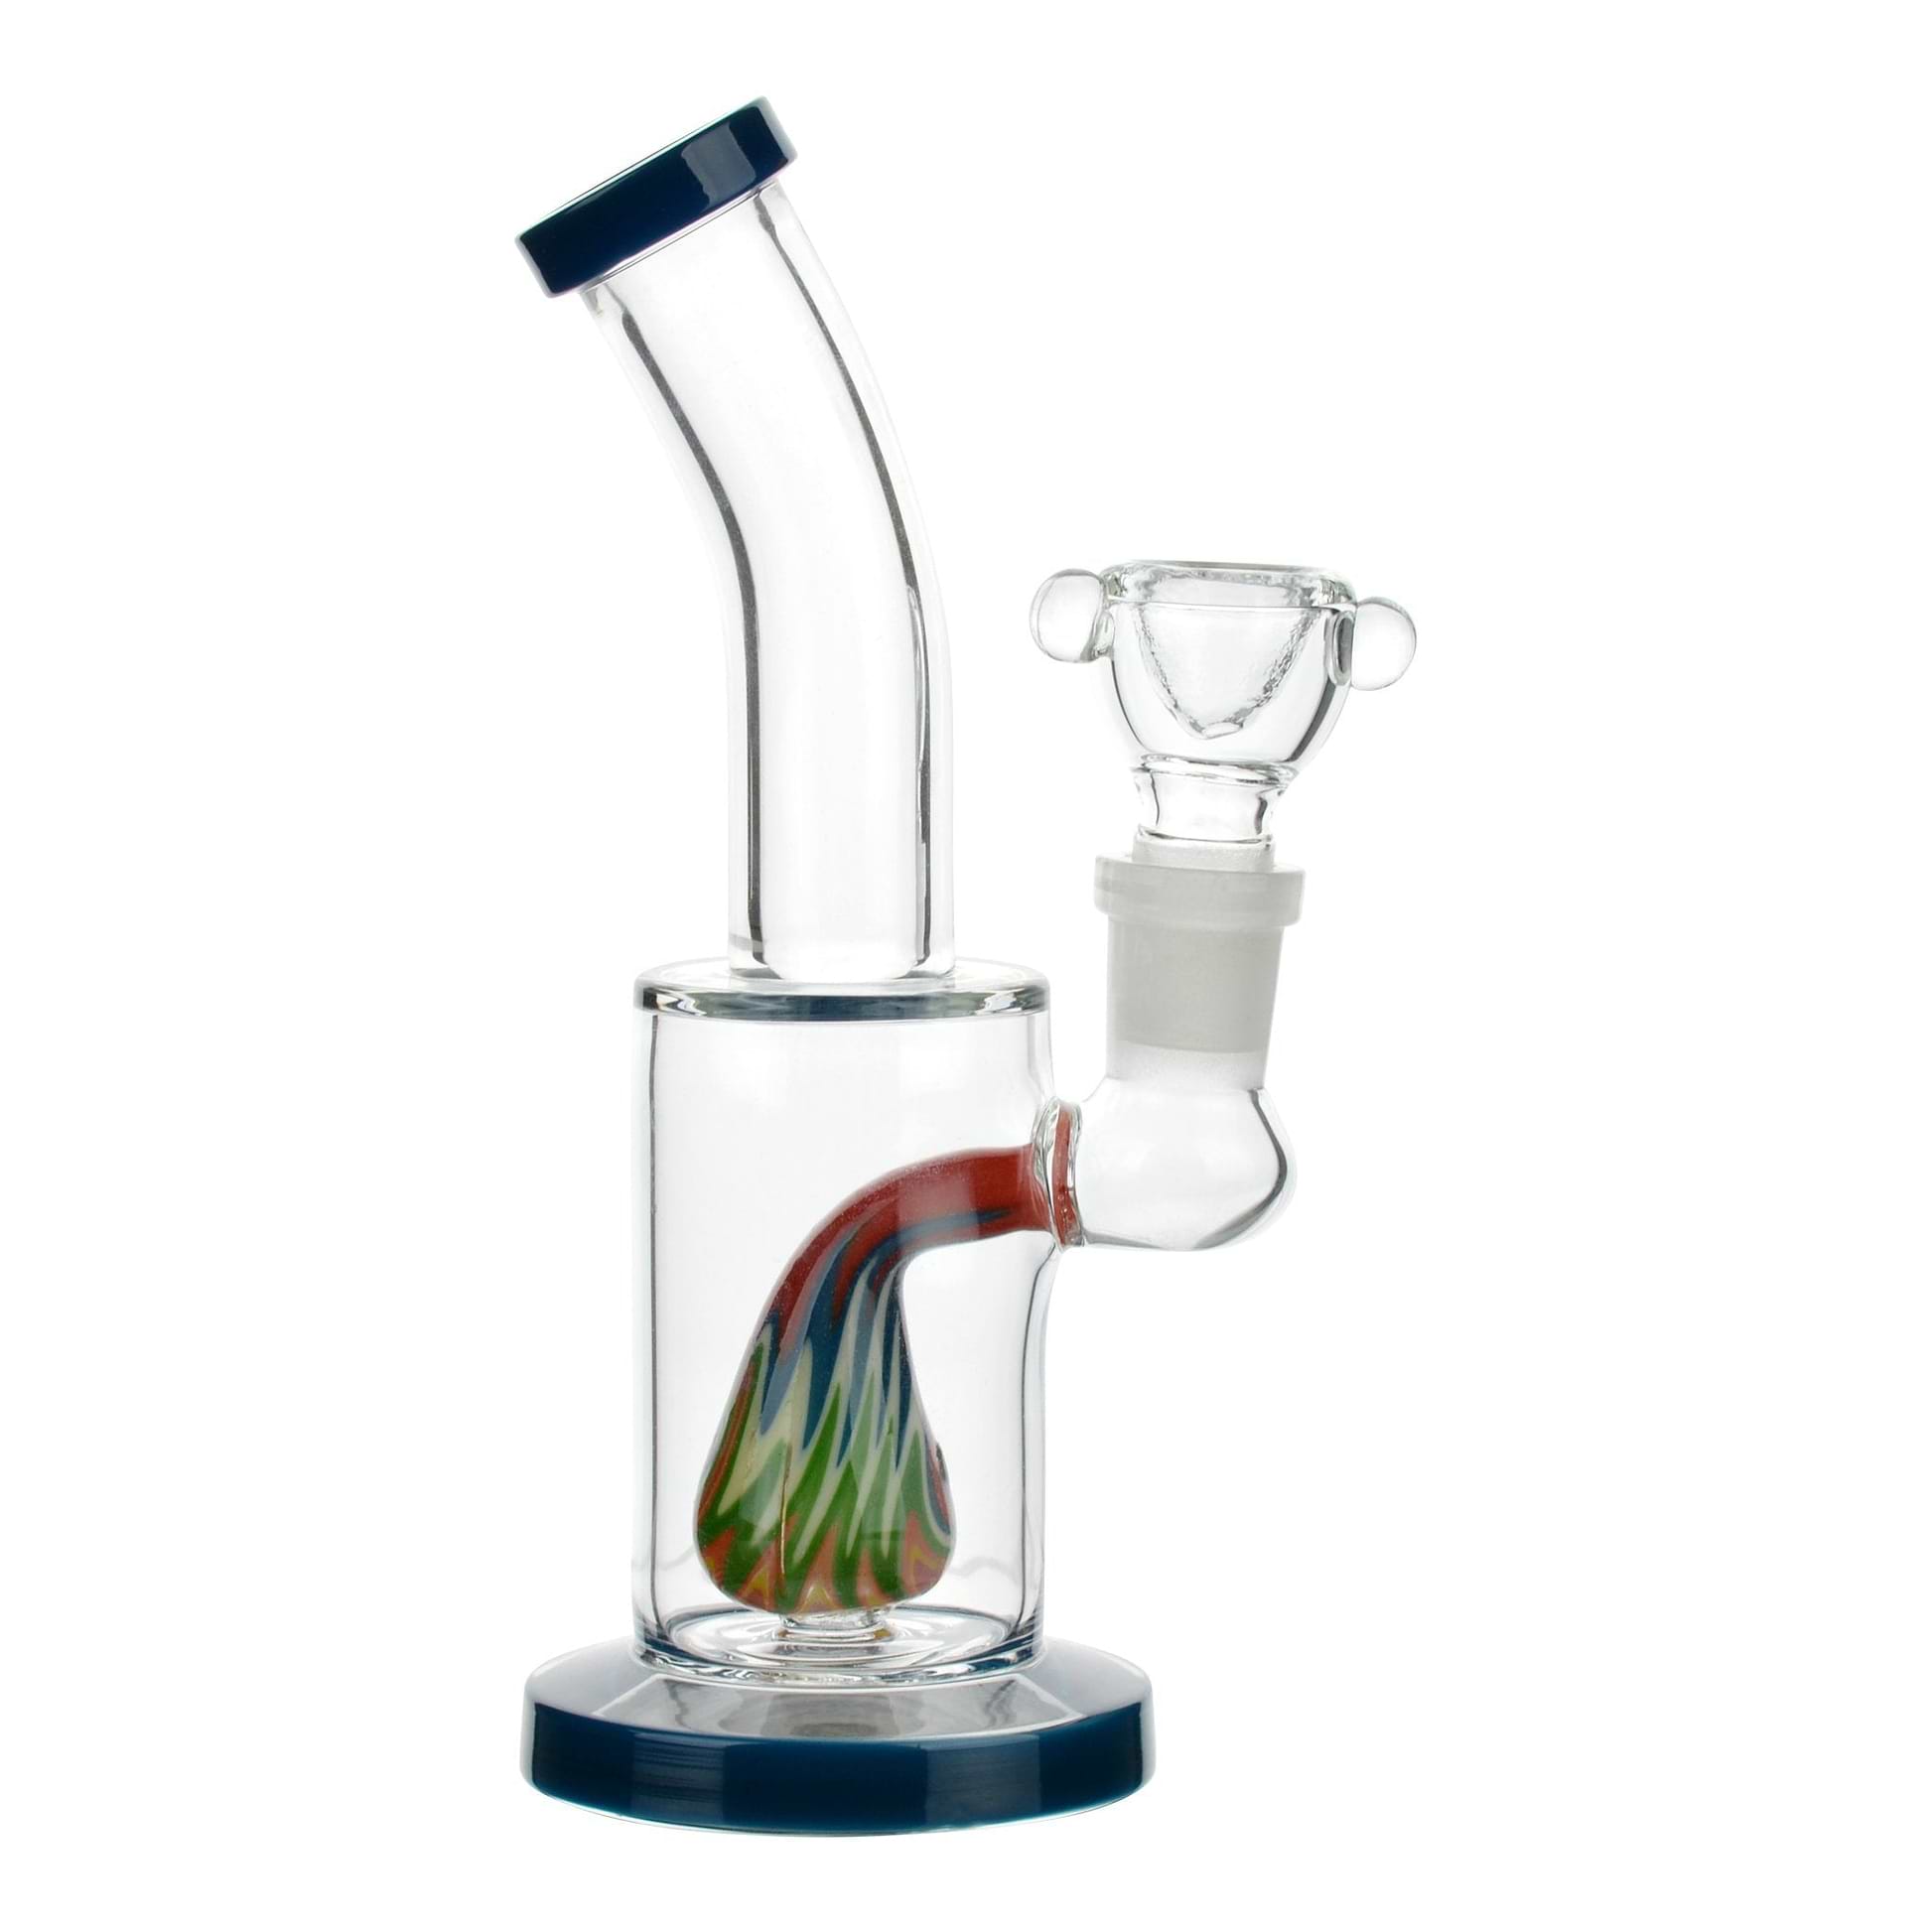 Blue 6-inch mess-free clear glass bong with diffuser downstem psychedelic centerpiece hippy 60s design no splash sturdy